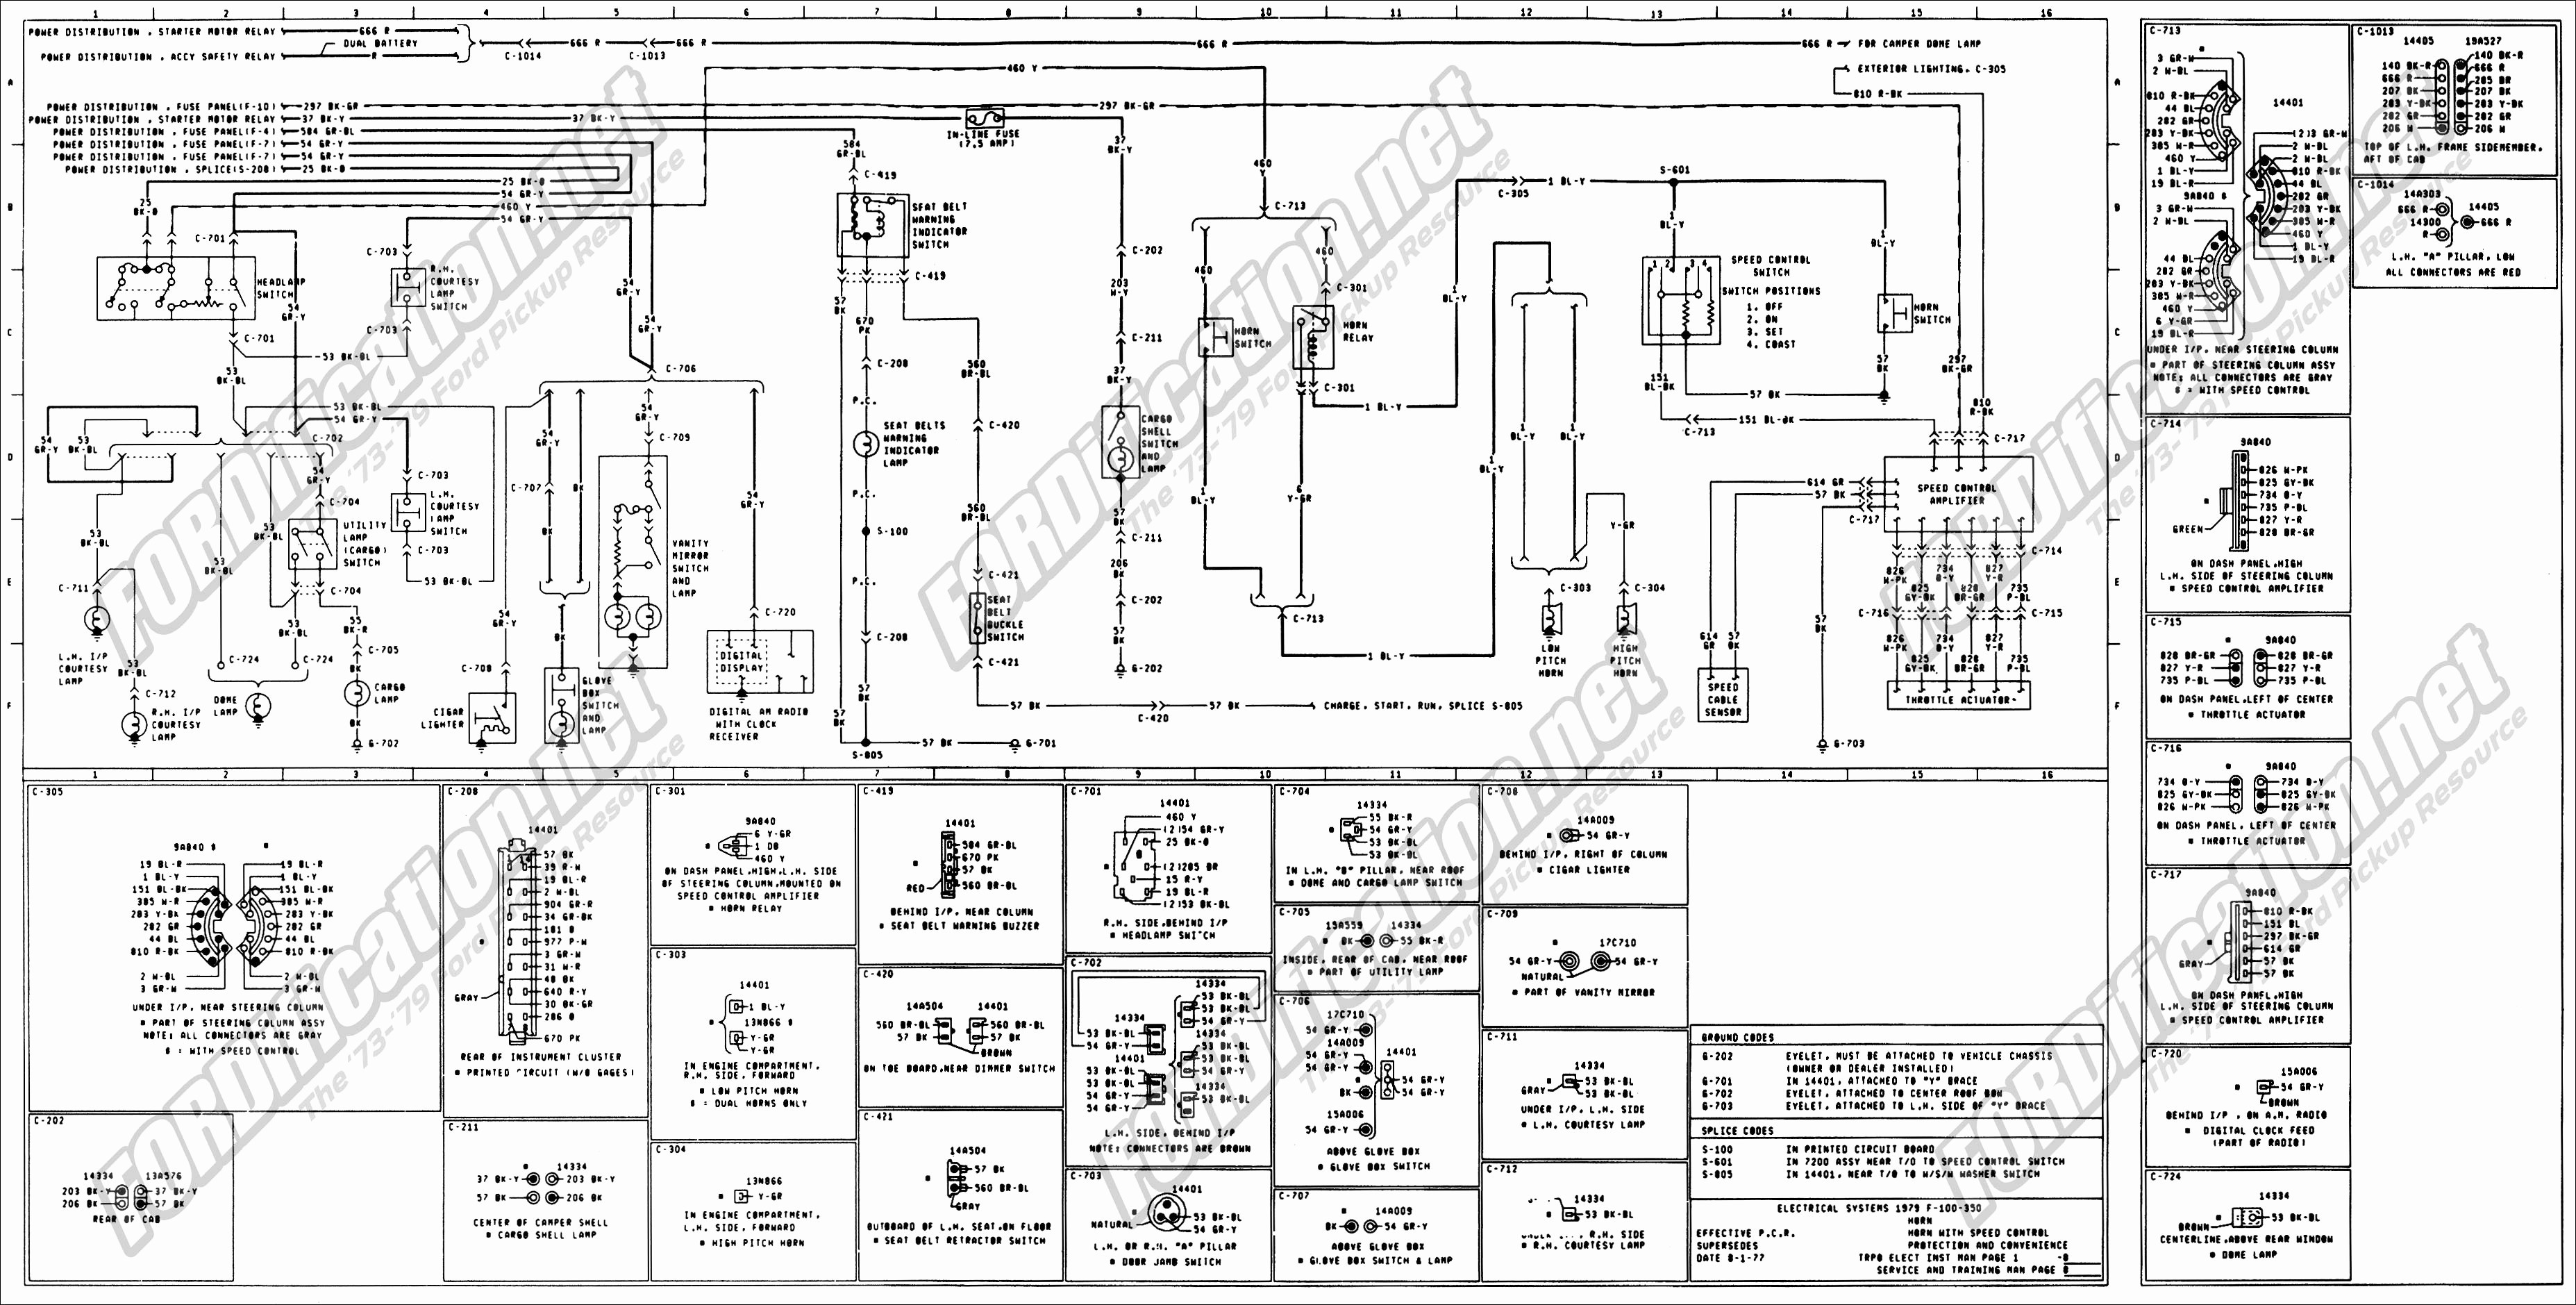 Wiring Diagram For Auto Dimming Mirror Valid Wiring Diagram Taco Zone Valve Wiring Diagram Beautiful Taco Zone